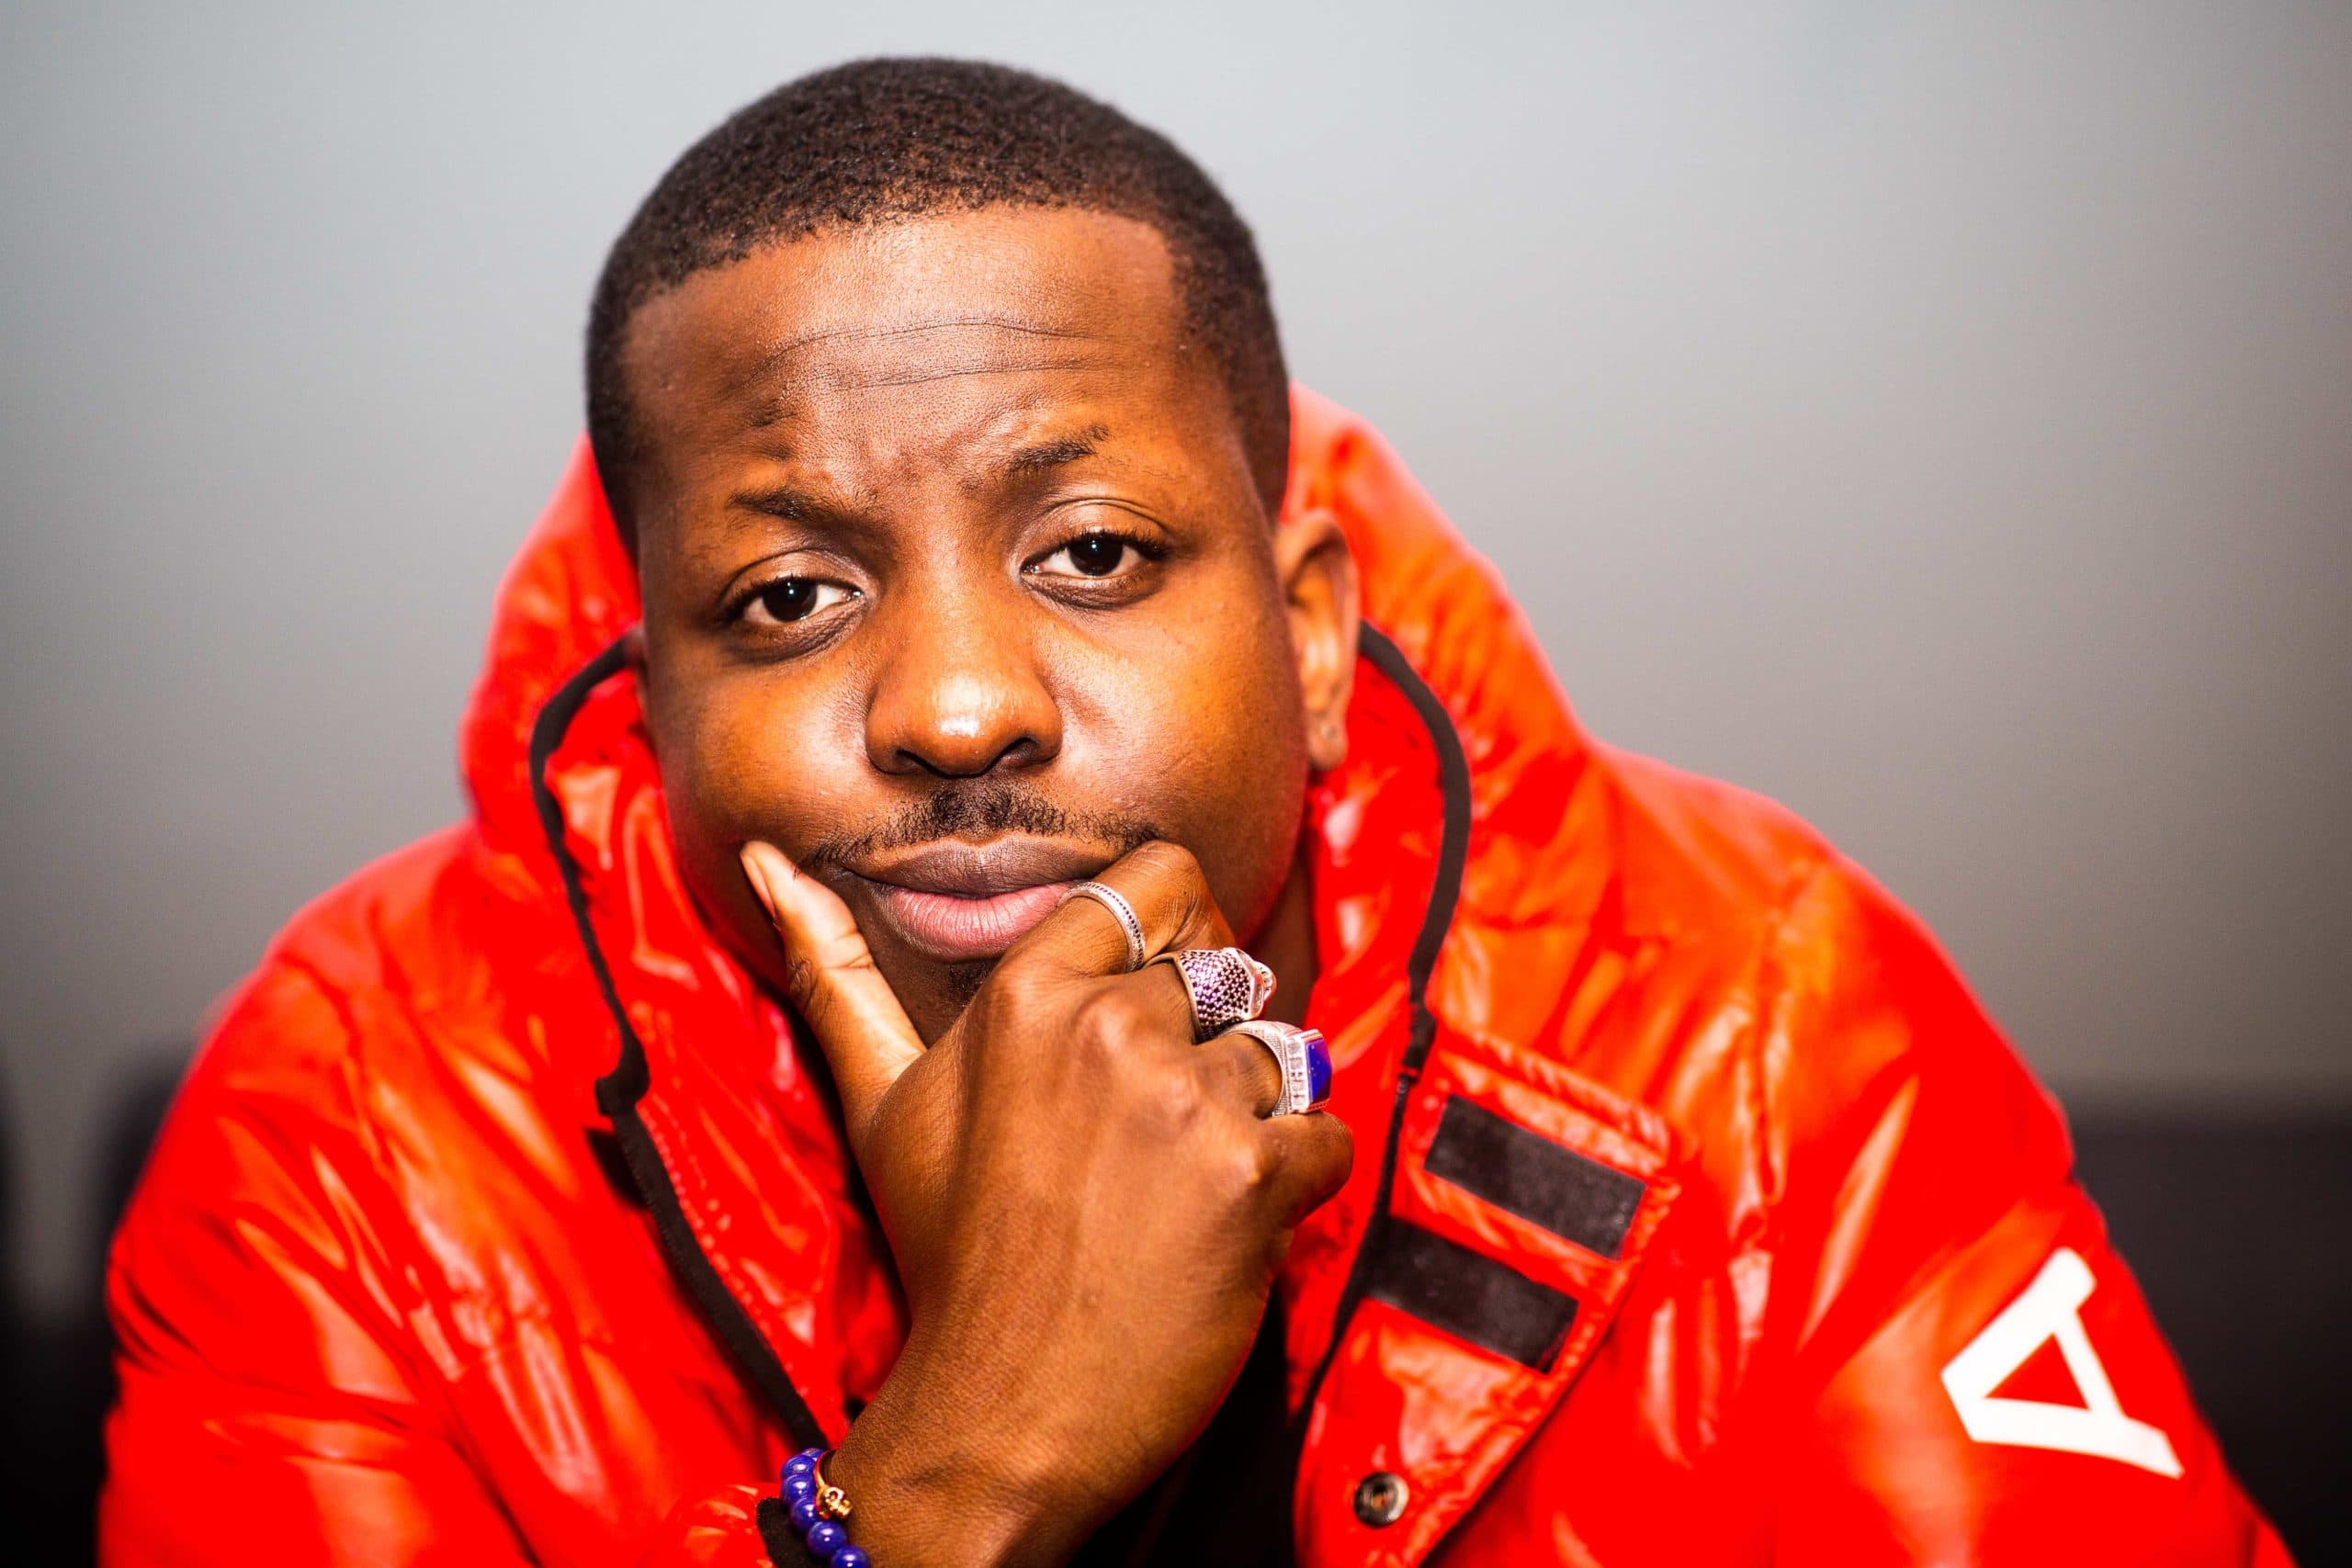 Jamal Edwards photographed in whynow studios